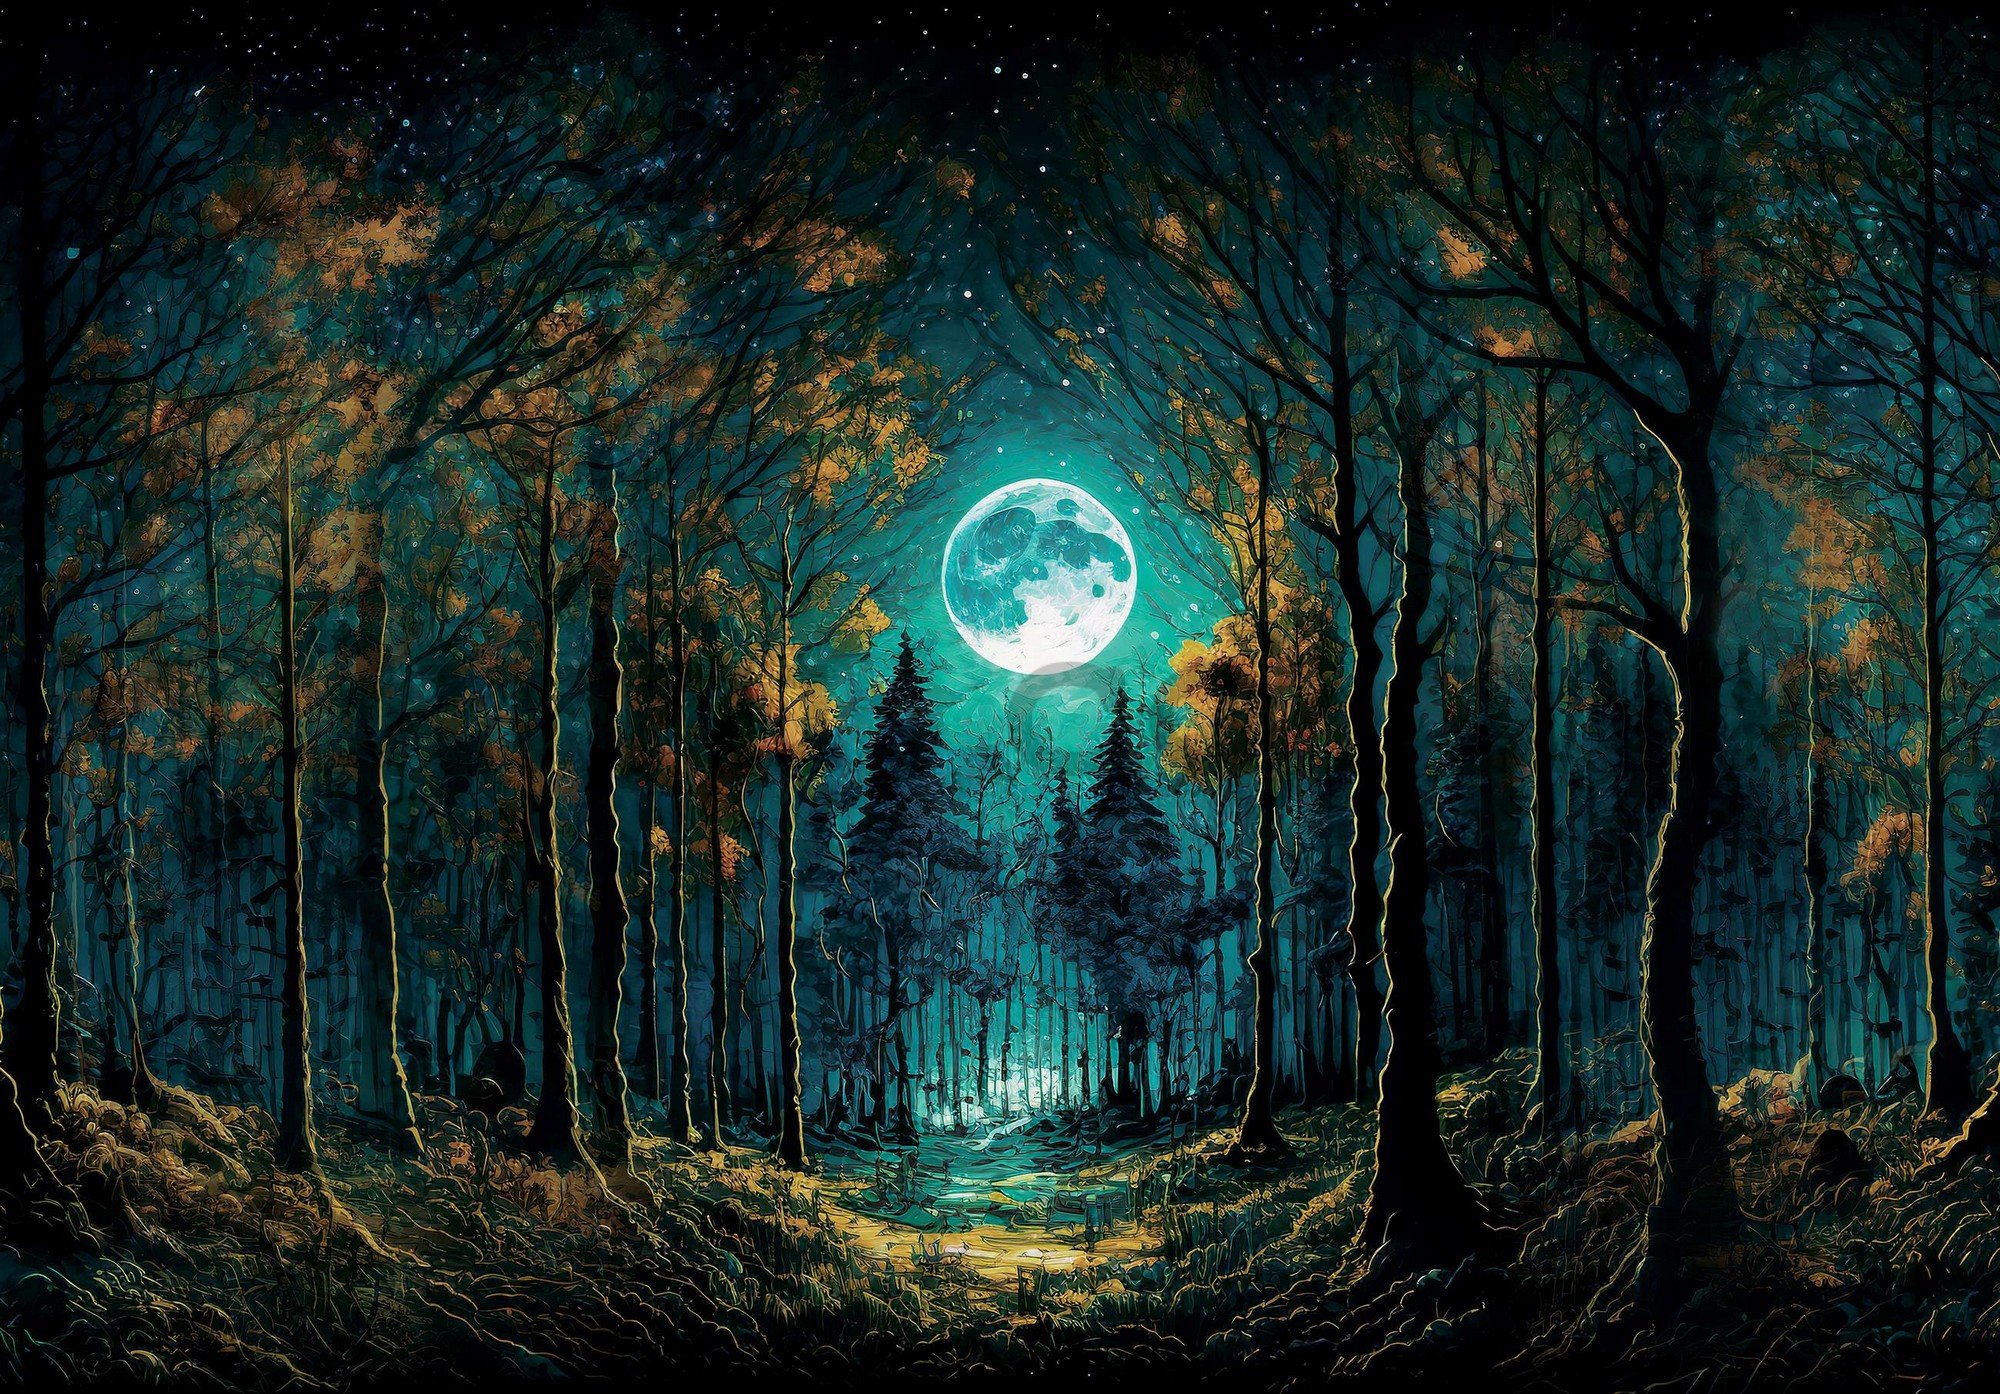 Wall mural vlies: Full moon in the forest - 416x254 cm